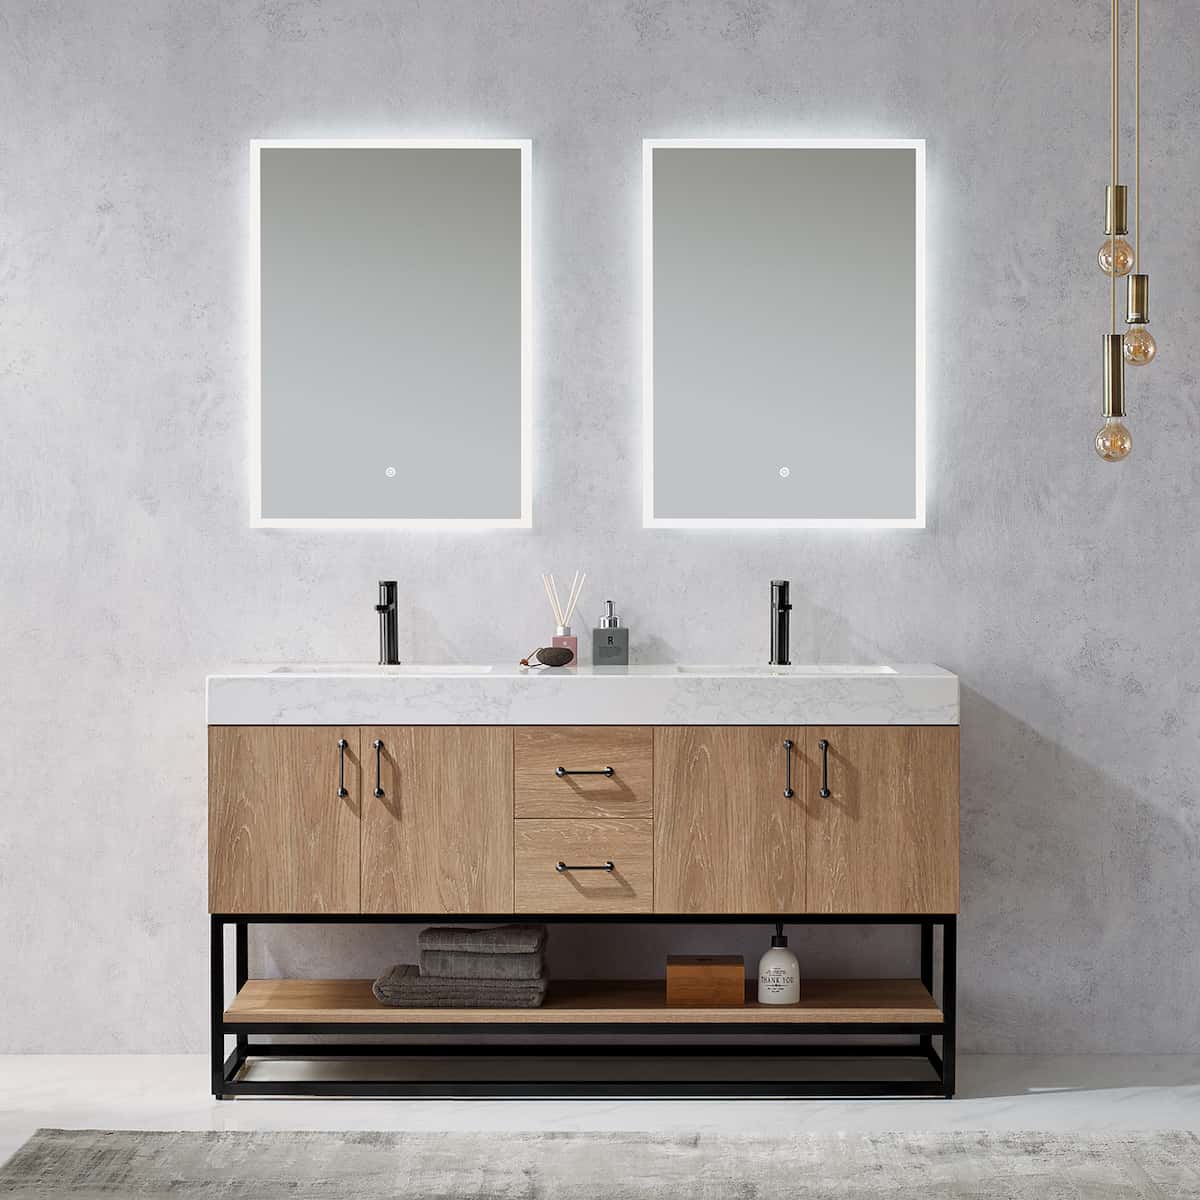 Vinnova Alistair 60 Inch Freestanding Double Vanity in North American Oak and Matte Black Frame with White Grain Stone Countertop With Mirrors in Bathroom 789060B-NO-GW